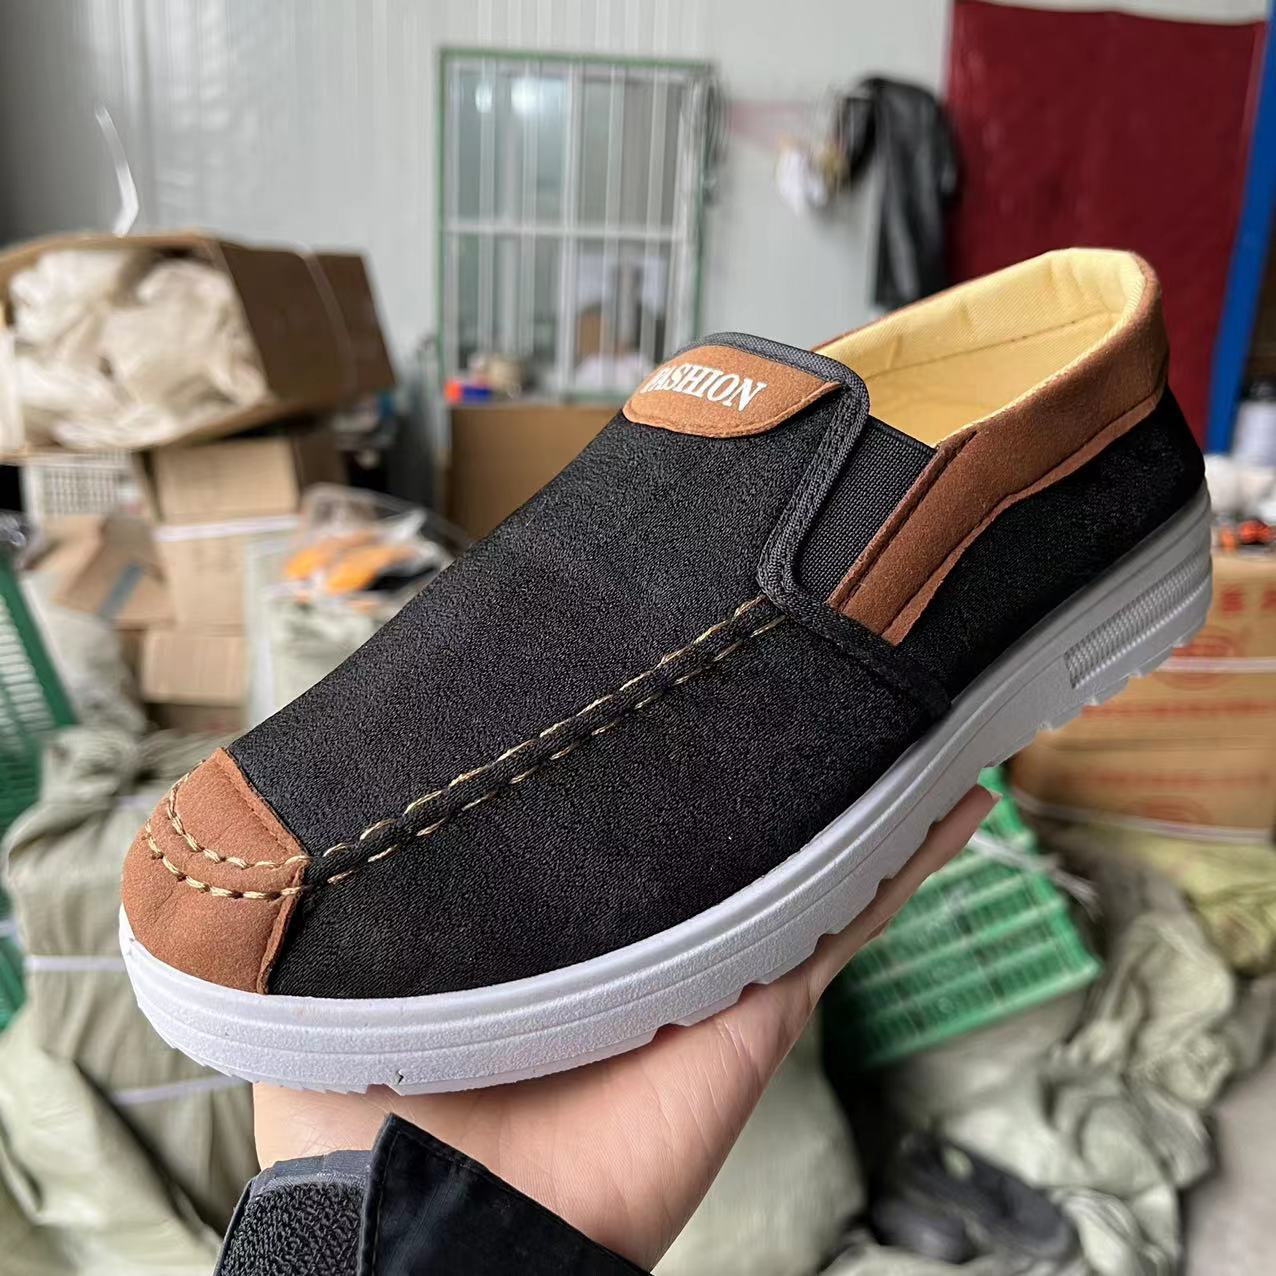 One Piece Dropshipping New Old Beijing Cloth Shoes Fashion Casual Male Student Shoes Slip-on Denim Canvas Lazy Shoes